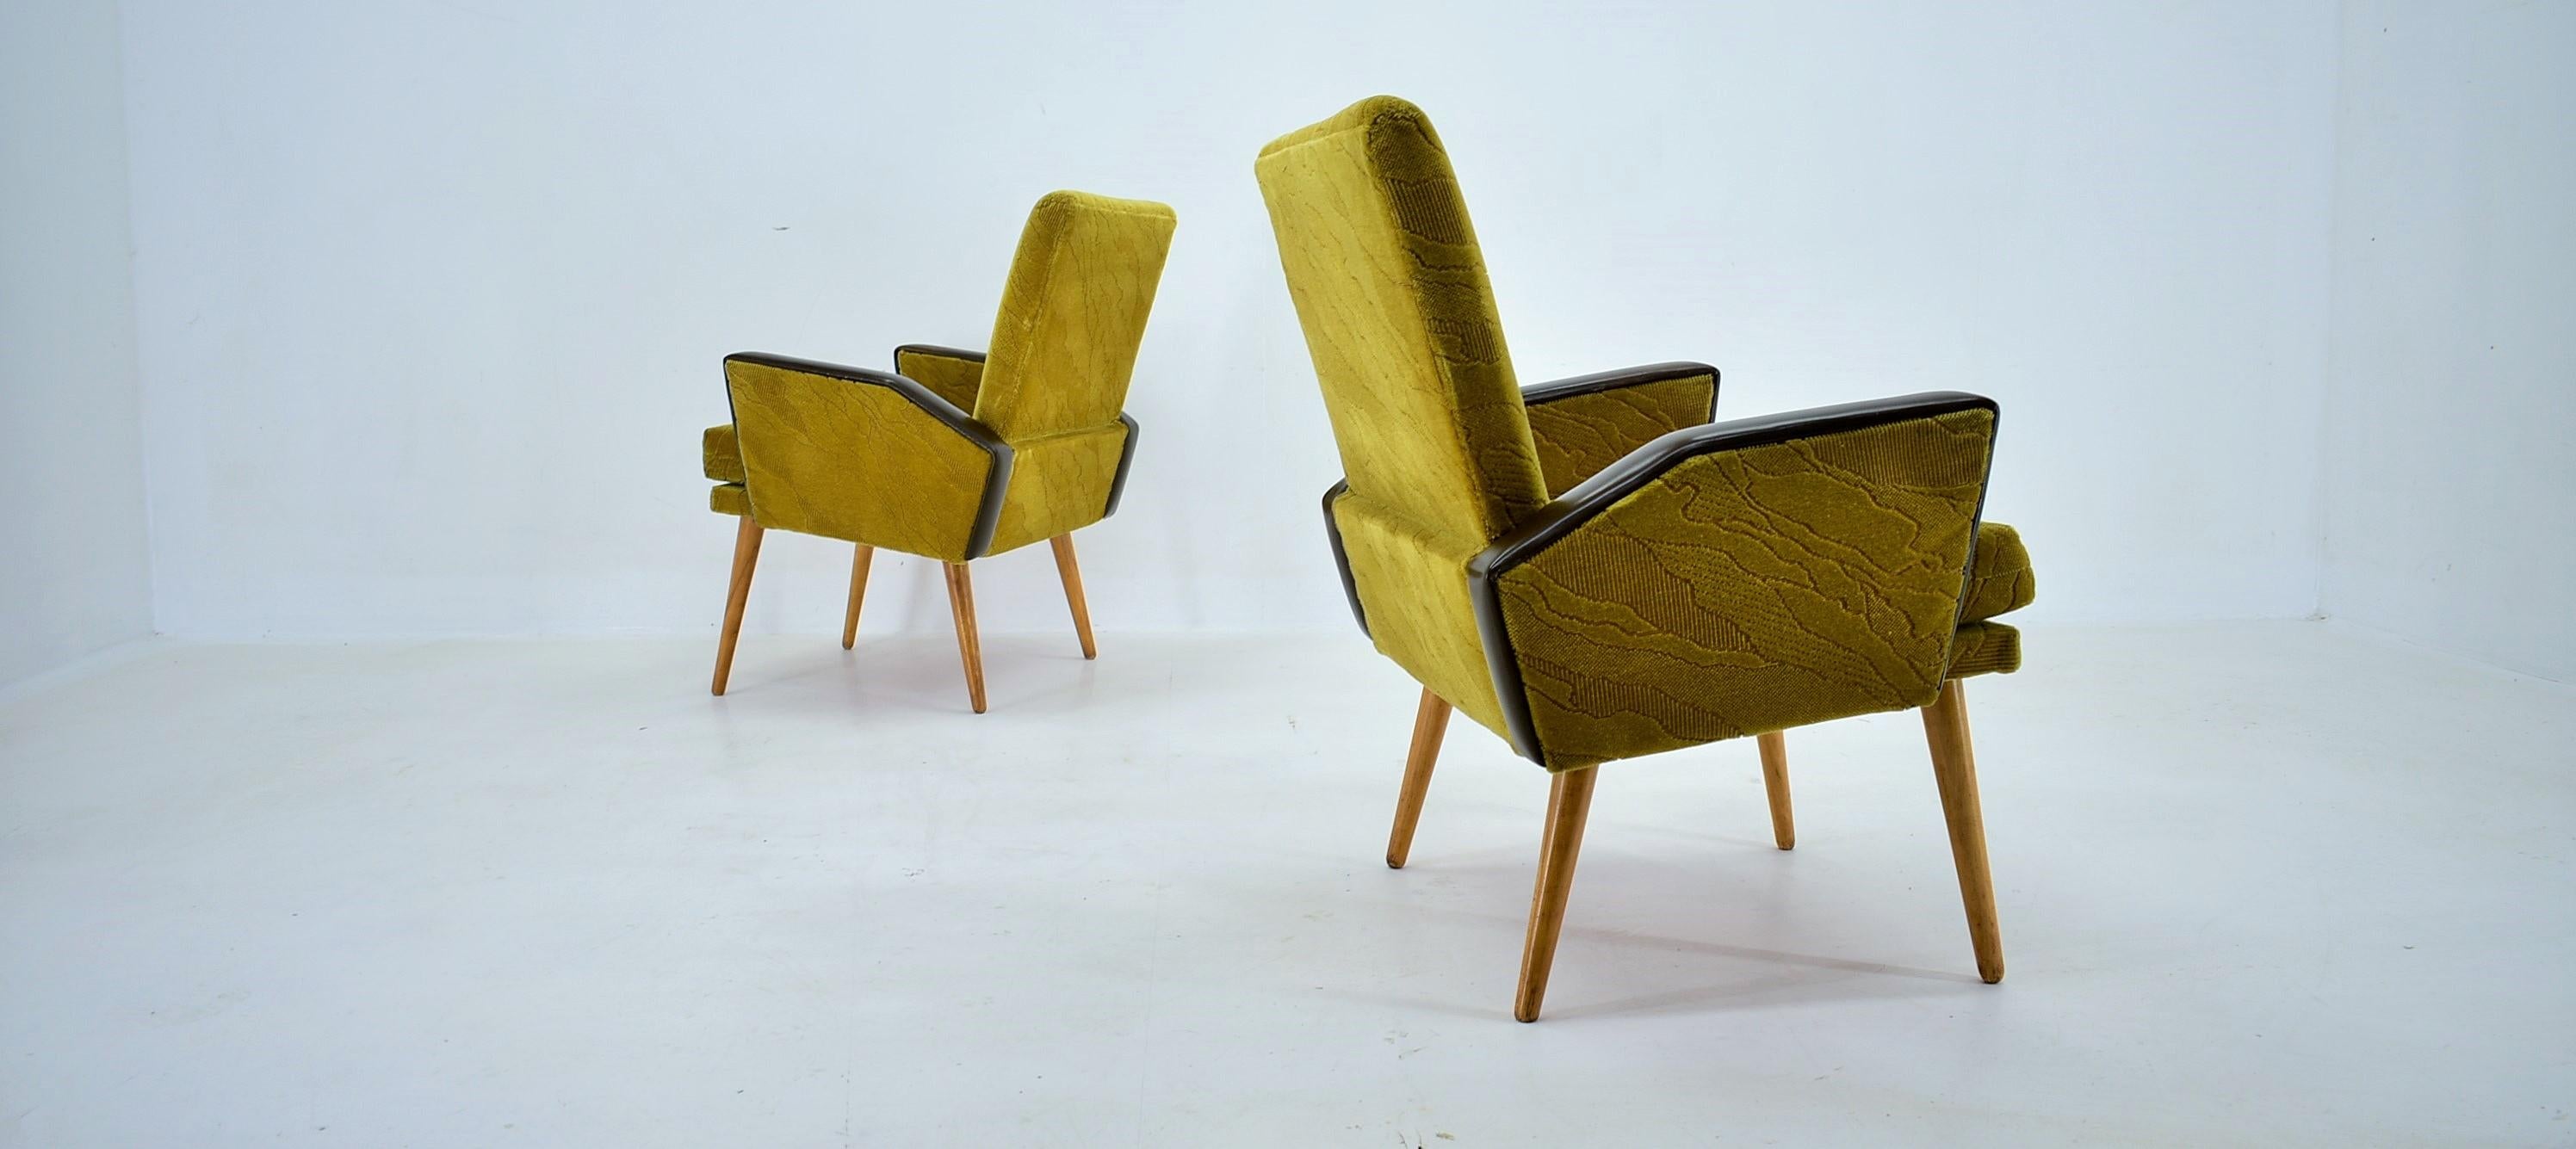 Midcentury Leather Armchairs Designed by Miroslav Navrátil, 1970s For Sale 4